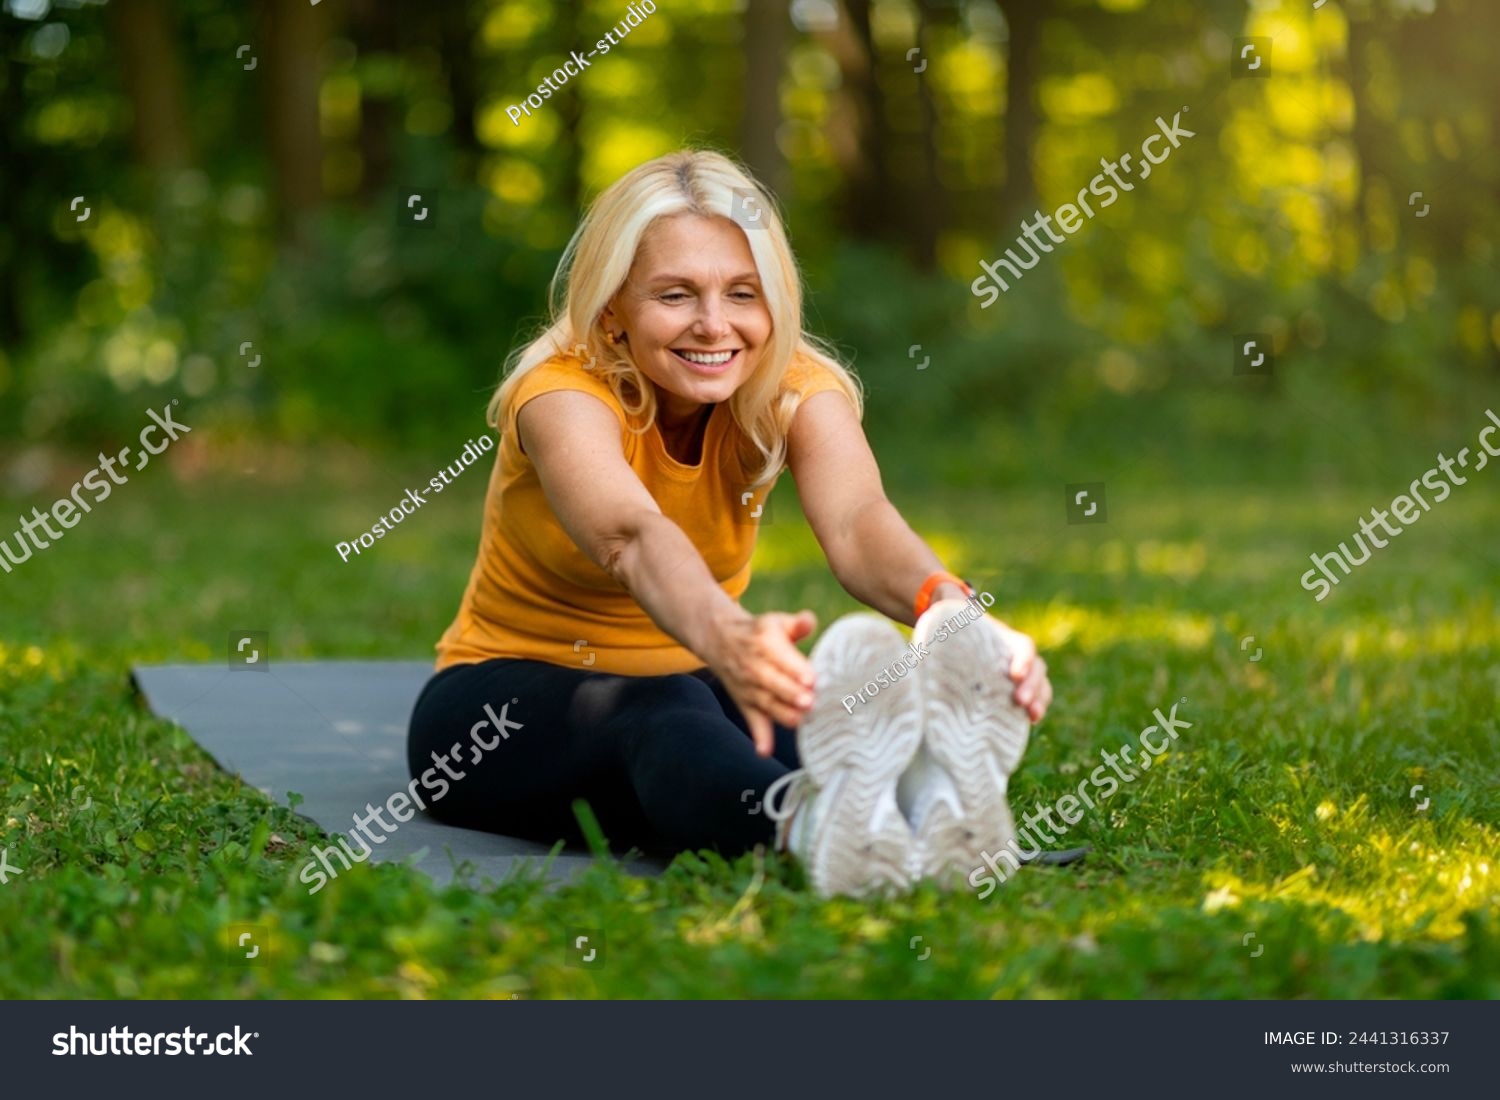 Radiant senior woman with blonde hair stretching towards her toes on yoga mat in sunlit park, happy sporty elderly female training outdoors, exuding health and happiness, copy space